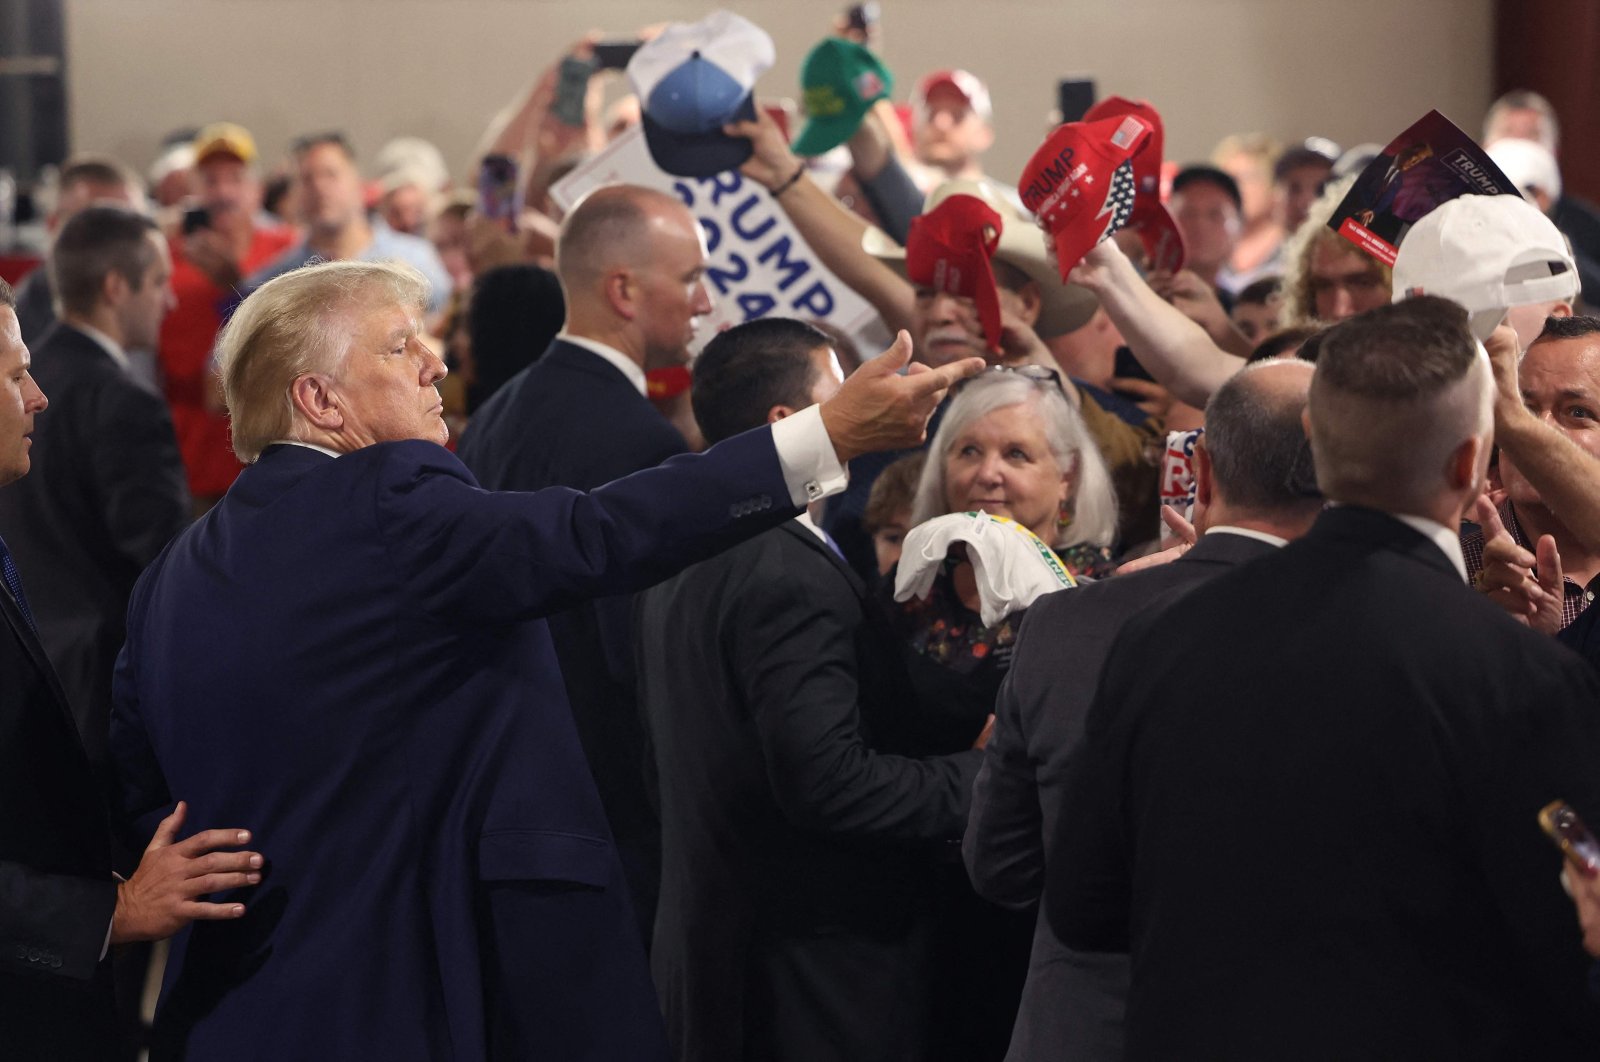 2024 Republican presidential candidate and former U.S. President Donald Trump greets guests following a &quot;Commit To Caucus&quot; rally at the Jackson County Fairgrounds in Maquoketa, Iowa, U.S., Sept. 20, 2023. (AFP Photo)